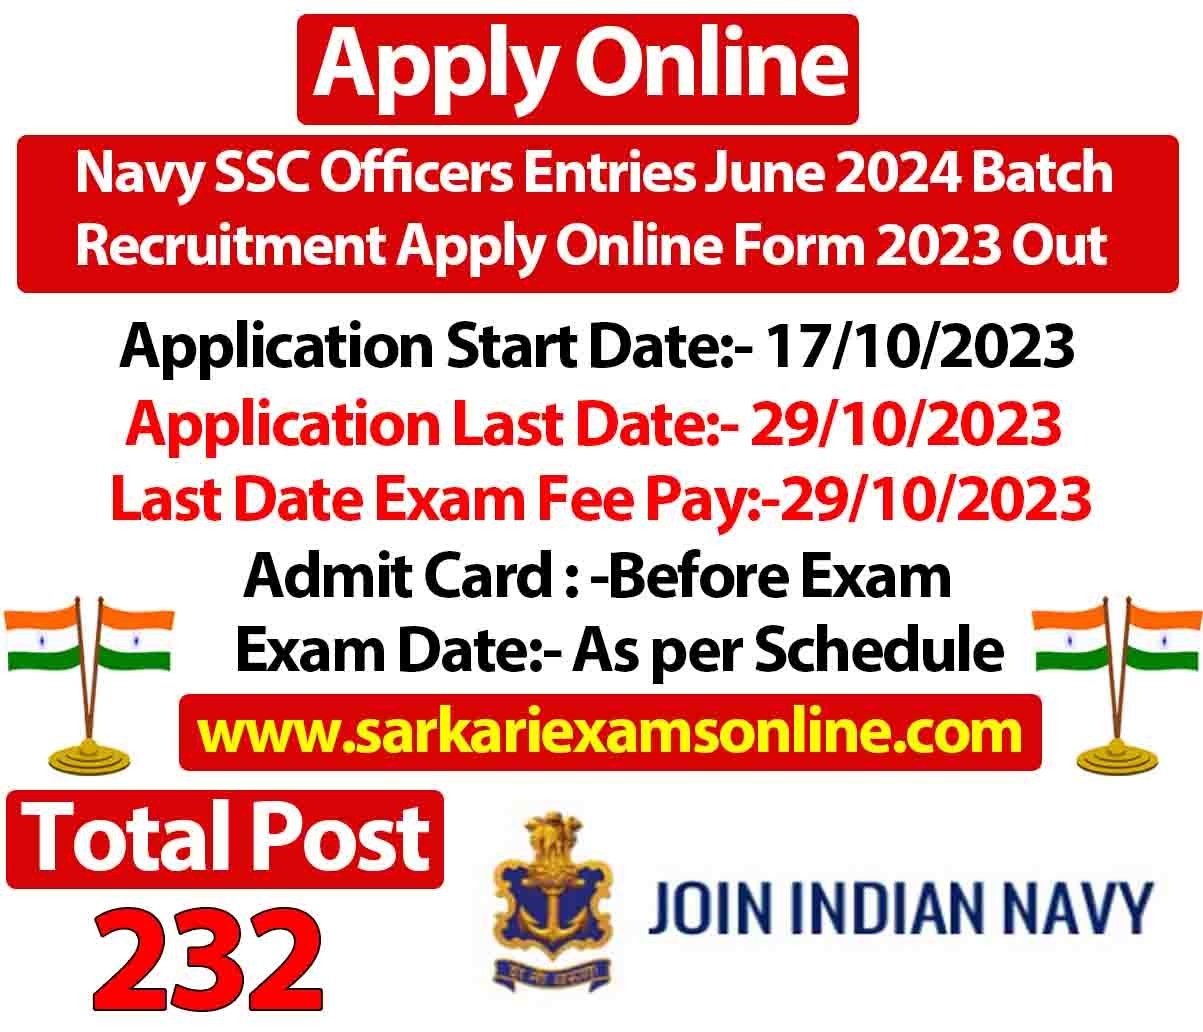 Navy Ssc Officers Entries June 2024 Batch Recruitment Apply Online Form 2023 Out